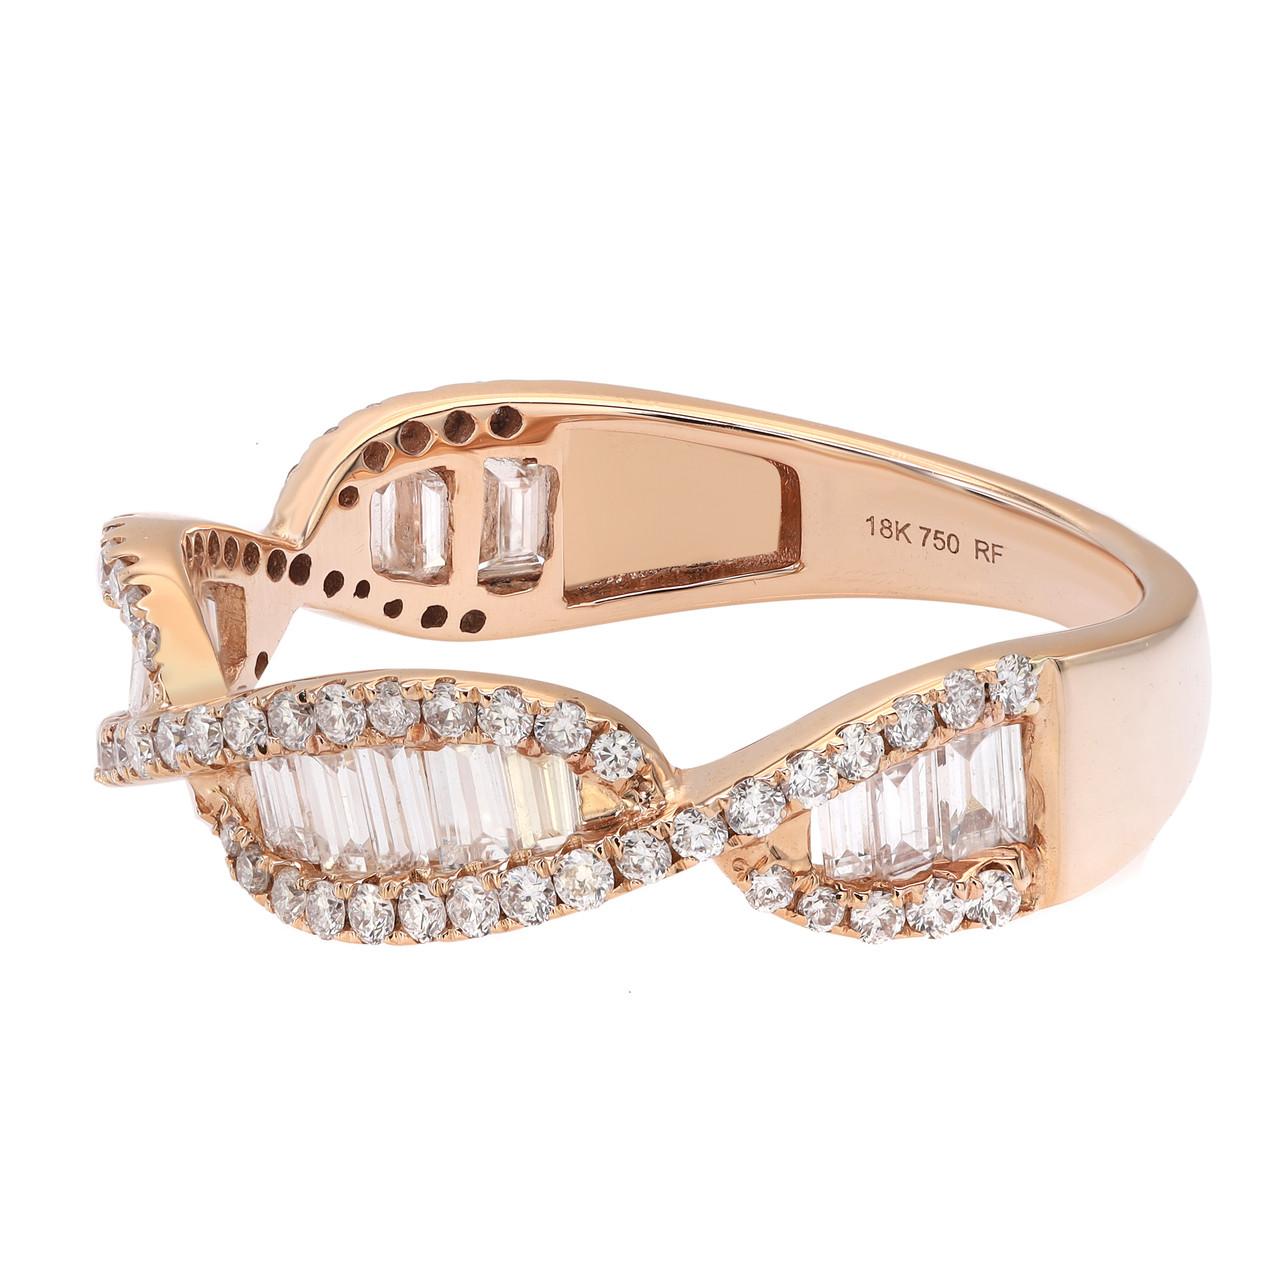 Introducing our stunning 0.69 Carat Round & Baguette Diamond Twist Band Ring in 18K Rose Gold. This ring features a beautiful combination of round and baguette-cut diamonds, creating a timeless and elegant design. The band showcases two rows of